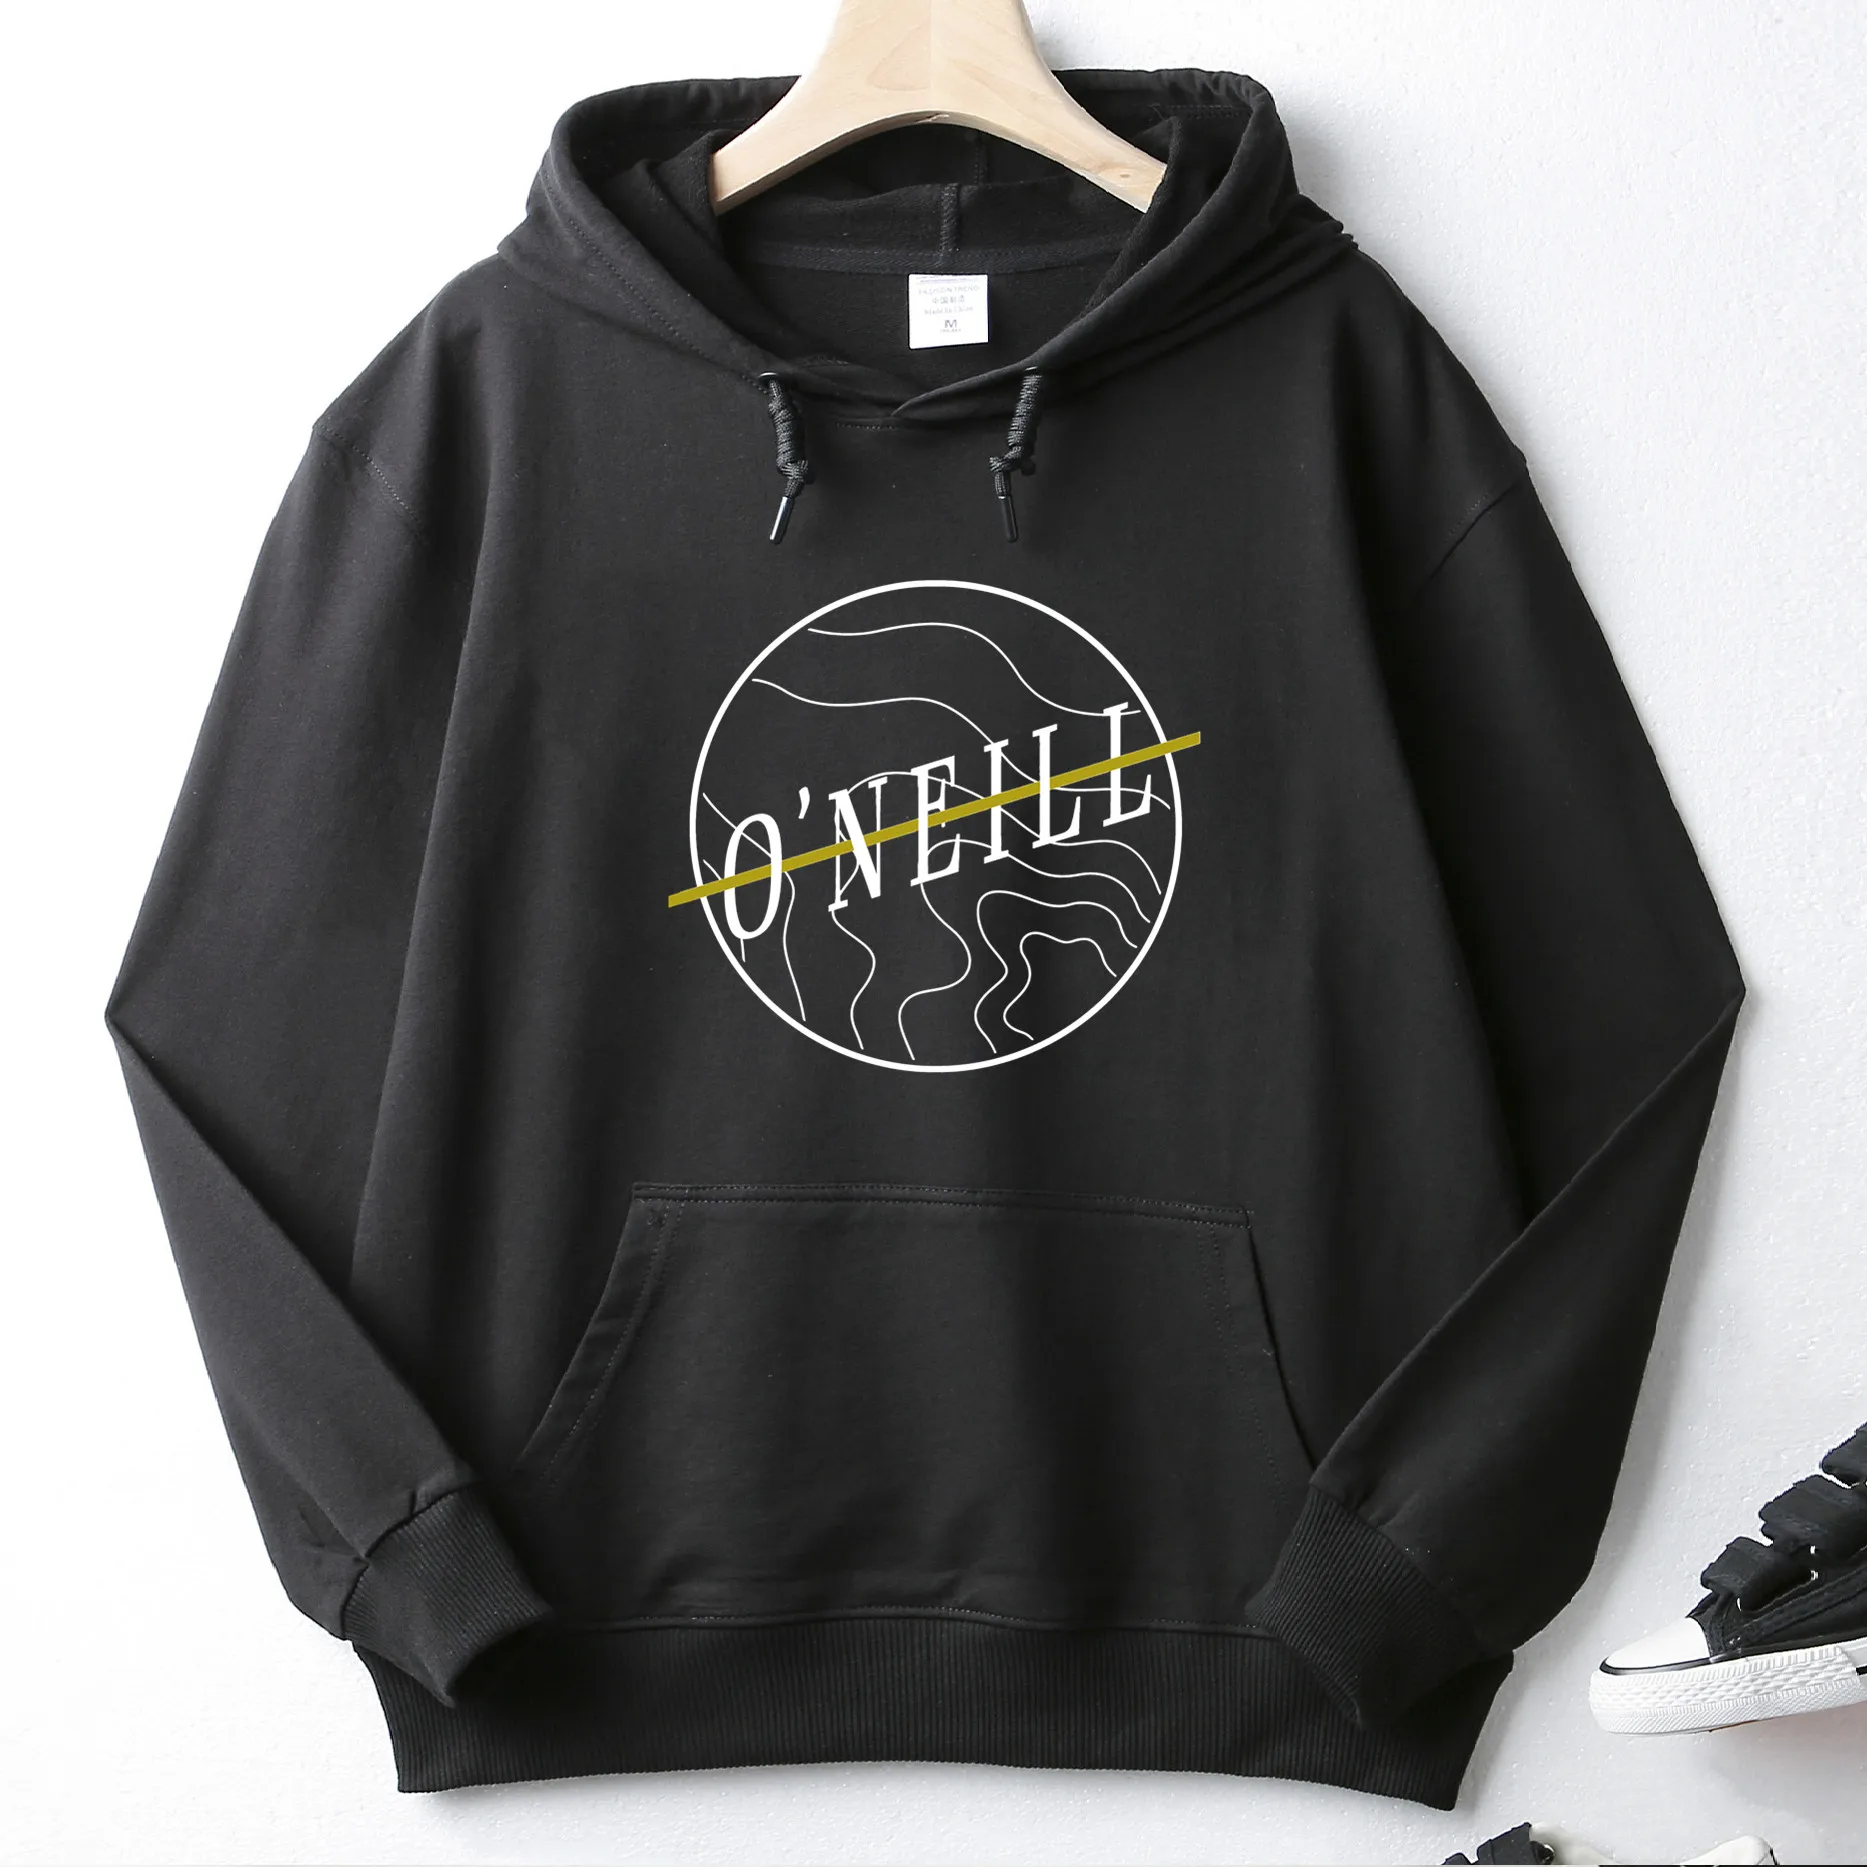 

ONeil The Waves In The Circle Logo Autumn Winter High Quality Printed Hoodie 100% Cotton Pocket Sweatshirt Unique Unisex Top